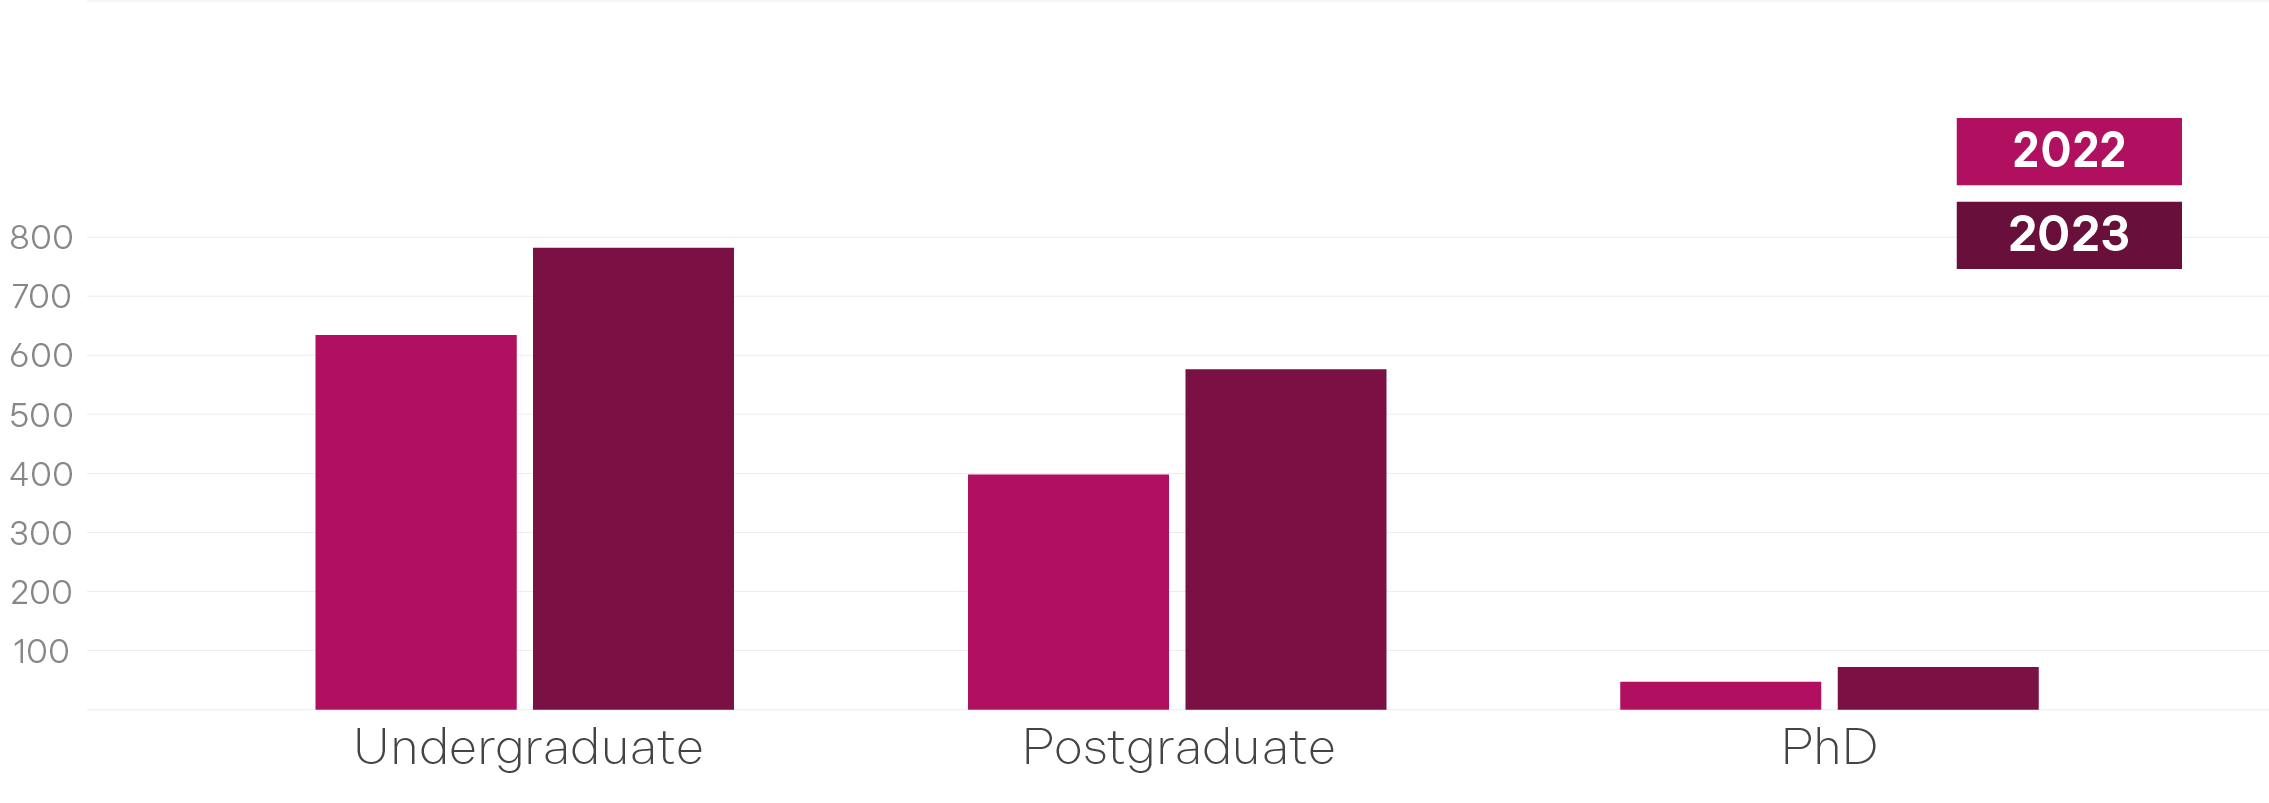 Bar chart showing the number of academic appeals received by the level of study